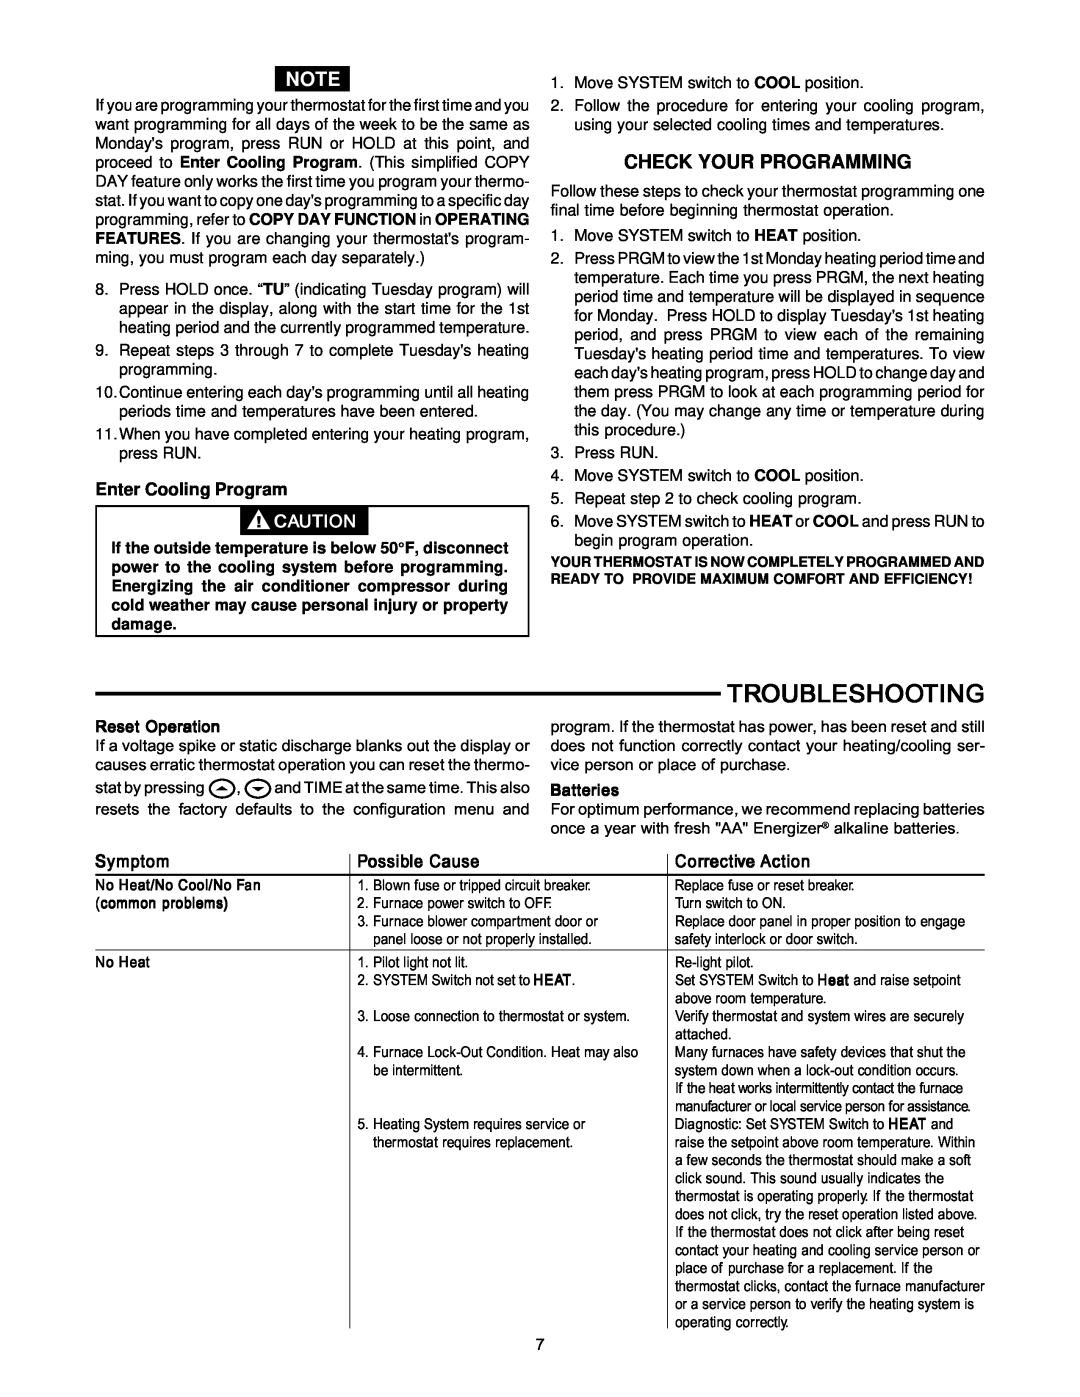 White Rodgers 1F87-361 specifications Troubleshooting, Enter Cooling Program, Symptom, Possible Cause, Corrective Action 